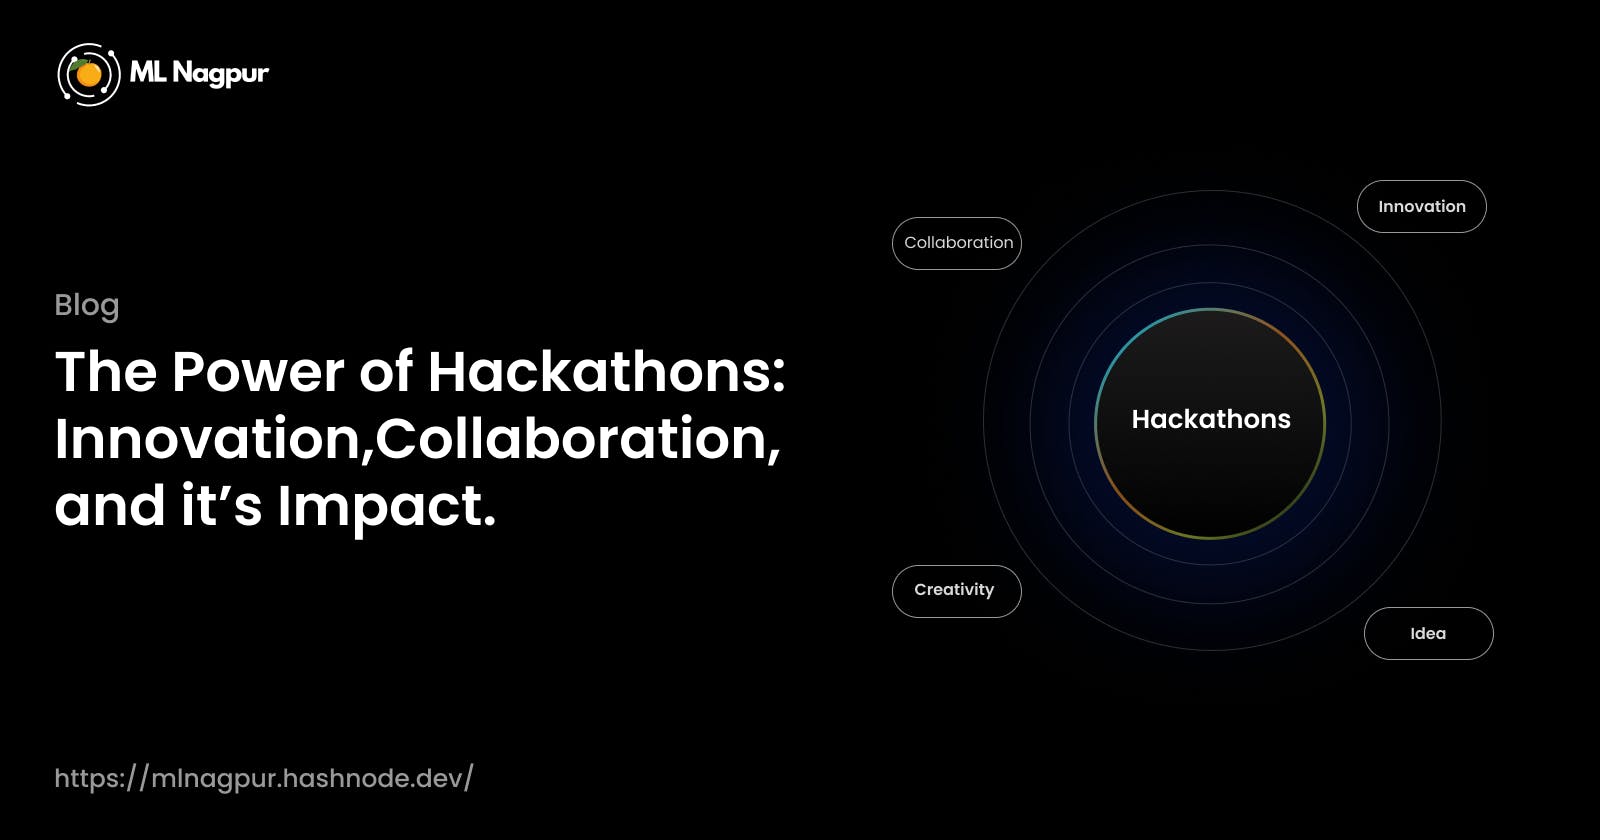 The Power of Hackathons: Innovation, Collaboration and Impact